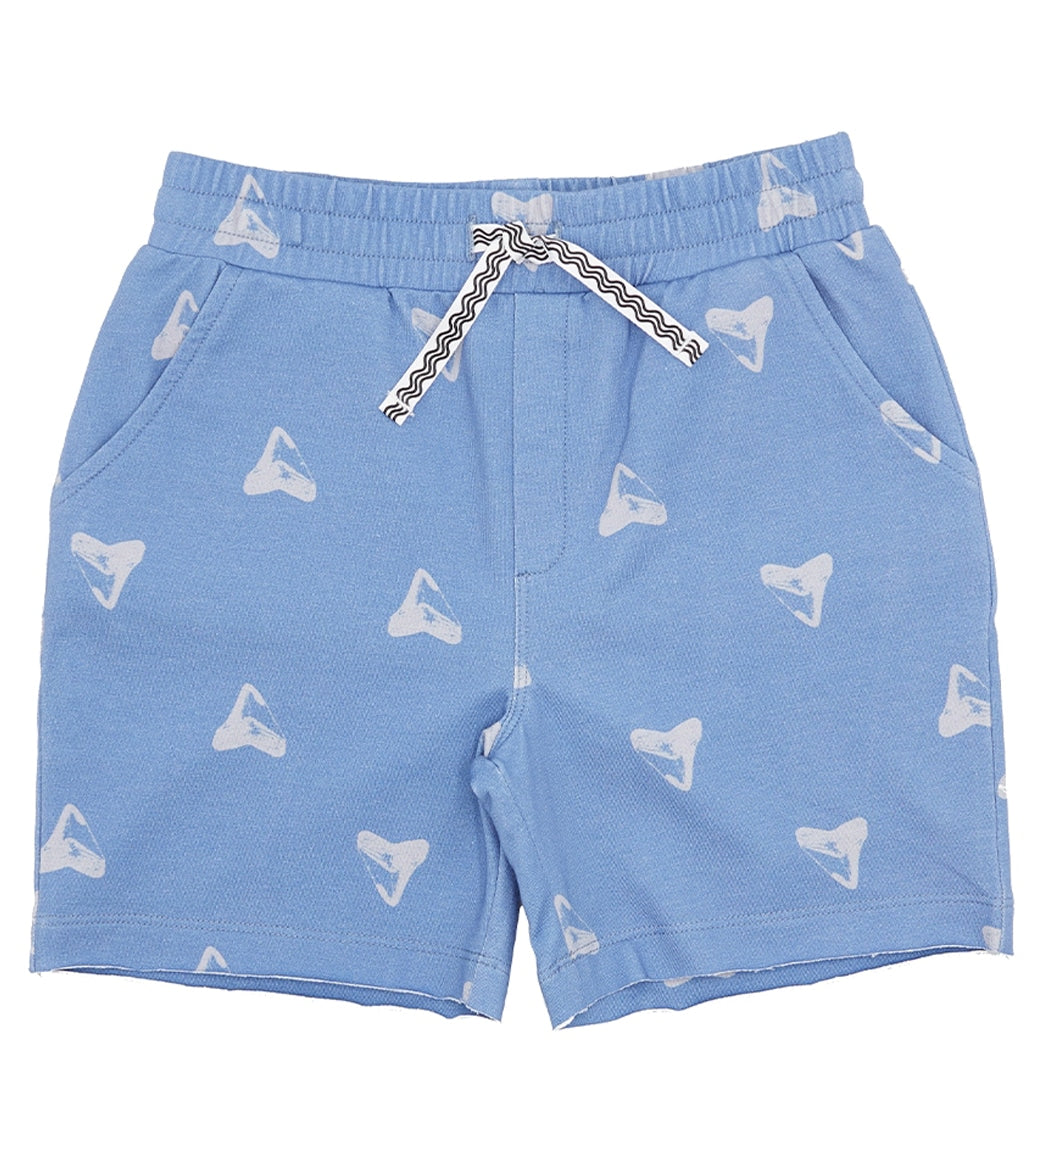 Feather 4 Arrow Boys Low Tide Shorts (Baby, Toddler, Little Kid, Big Kid)